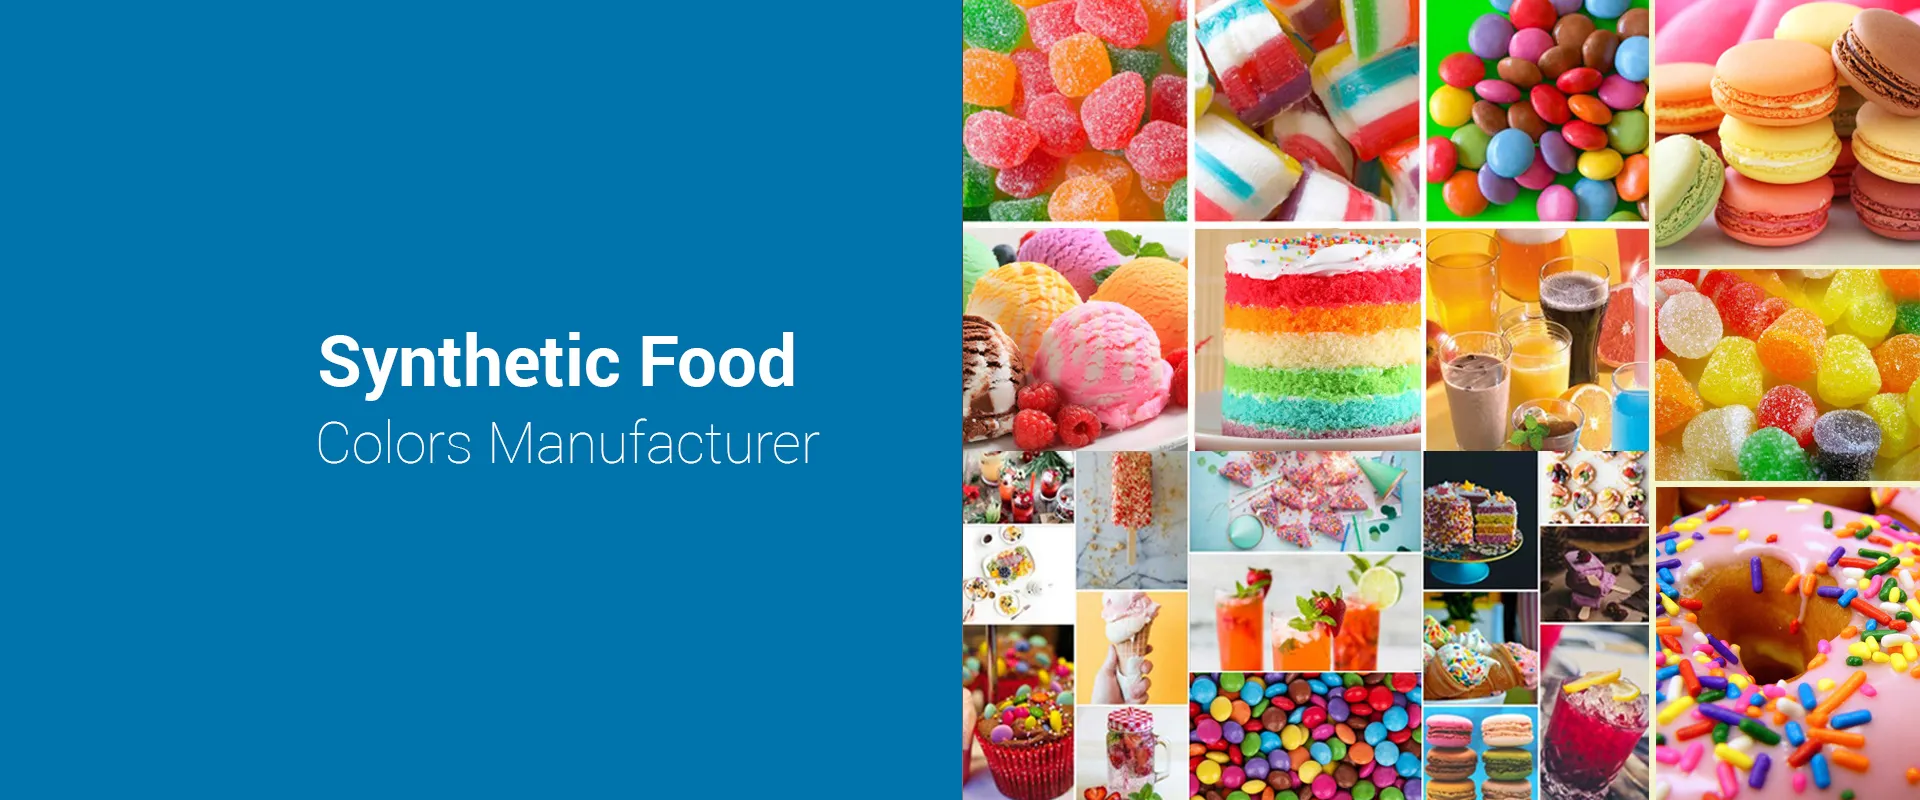 Food Colors, Synthetic Food Colors Manufacturer & Suppliers, India